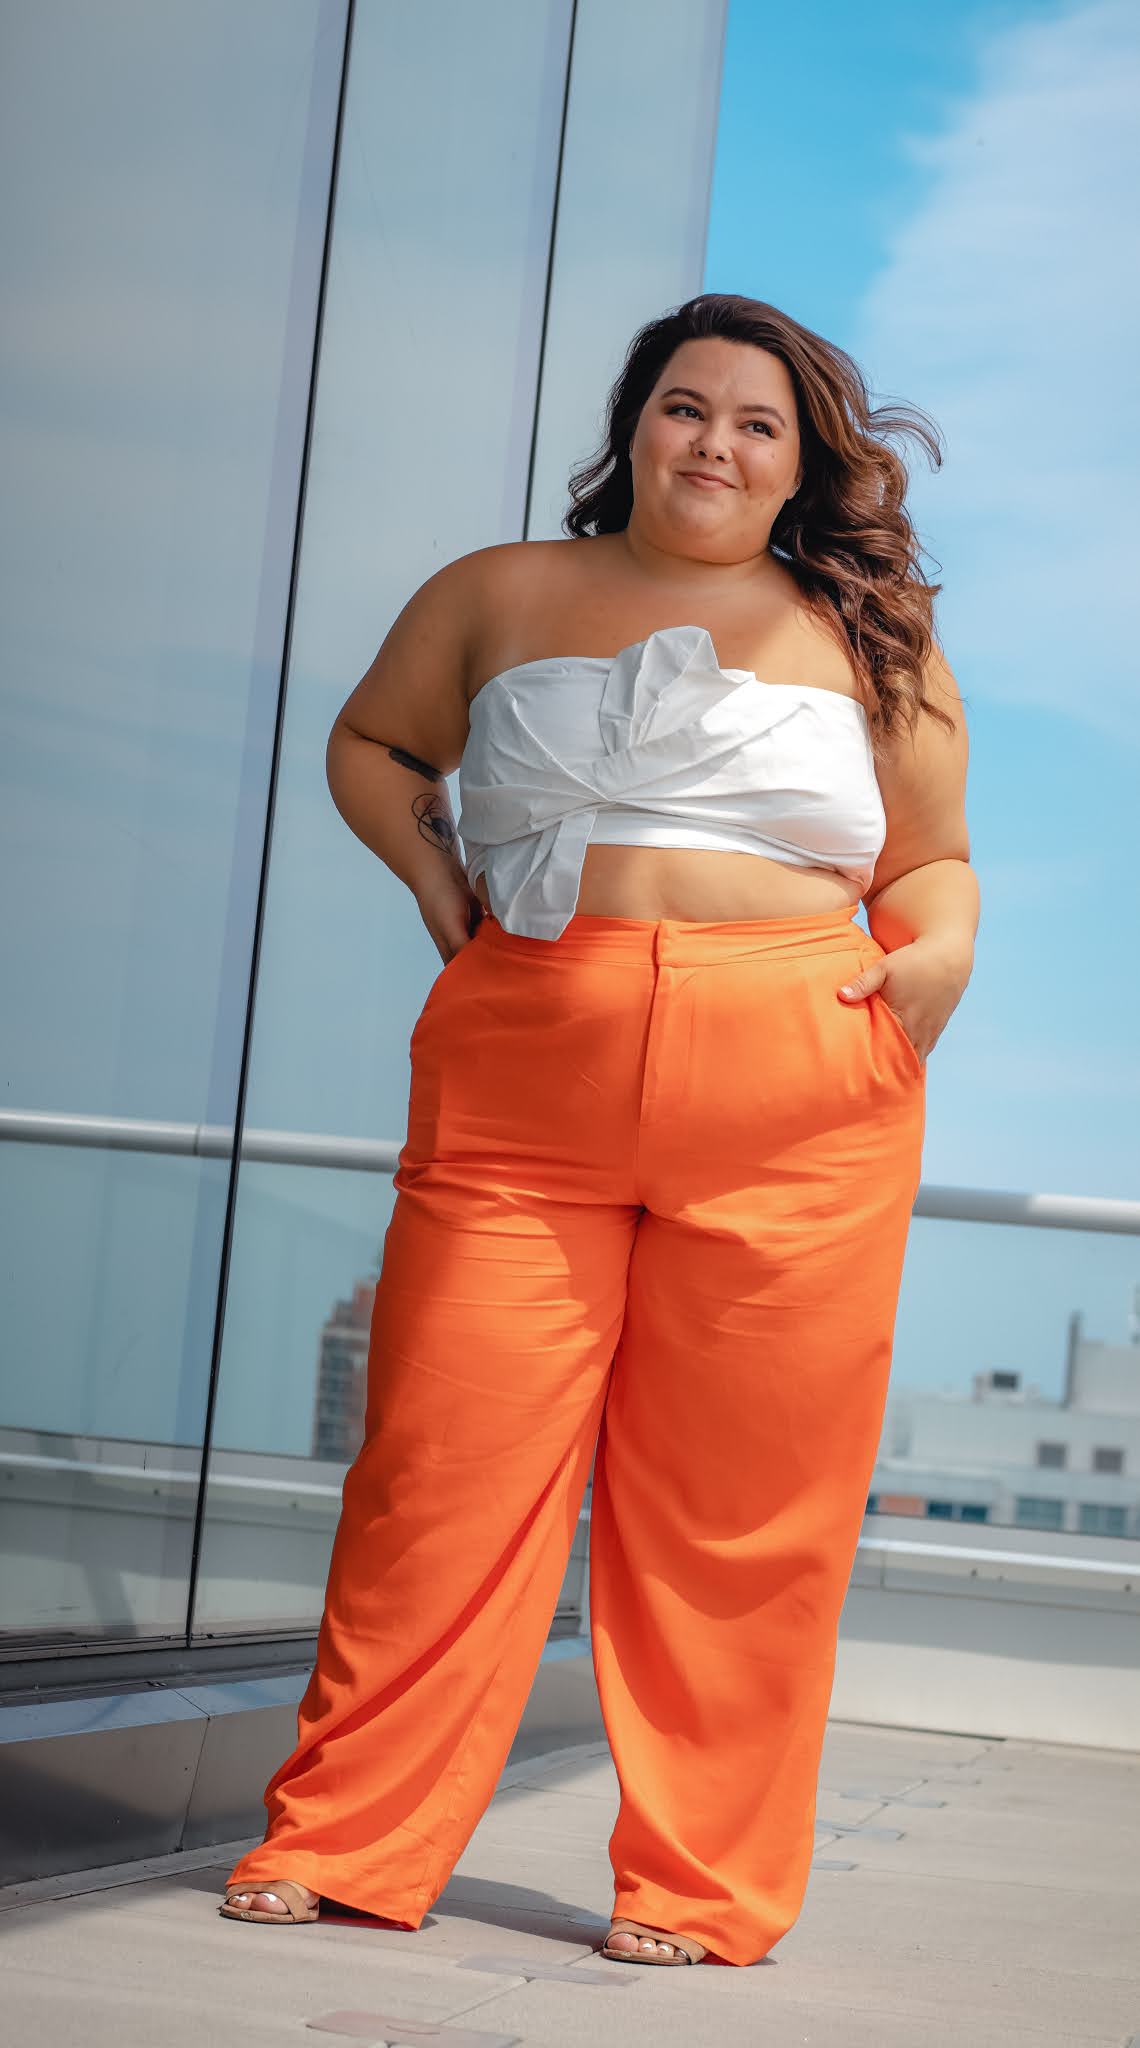 plus size and petite blogger and model Natalie in the City reviews wide leg pants she's wearing from Eloquii.